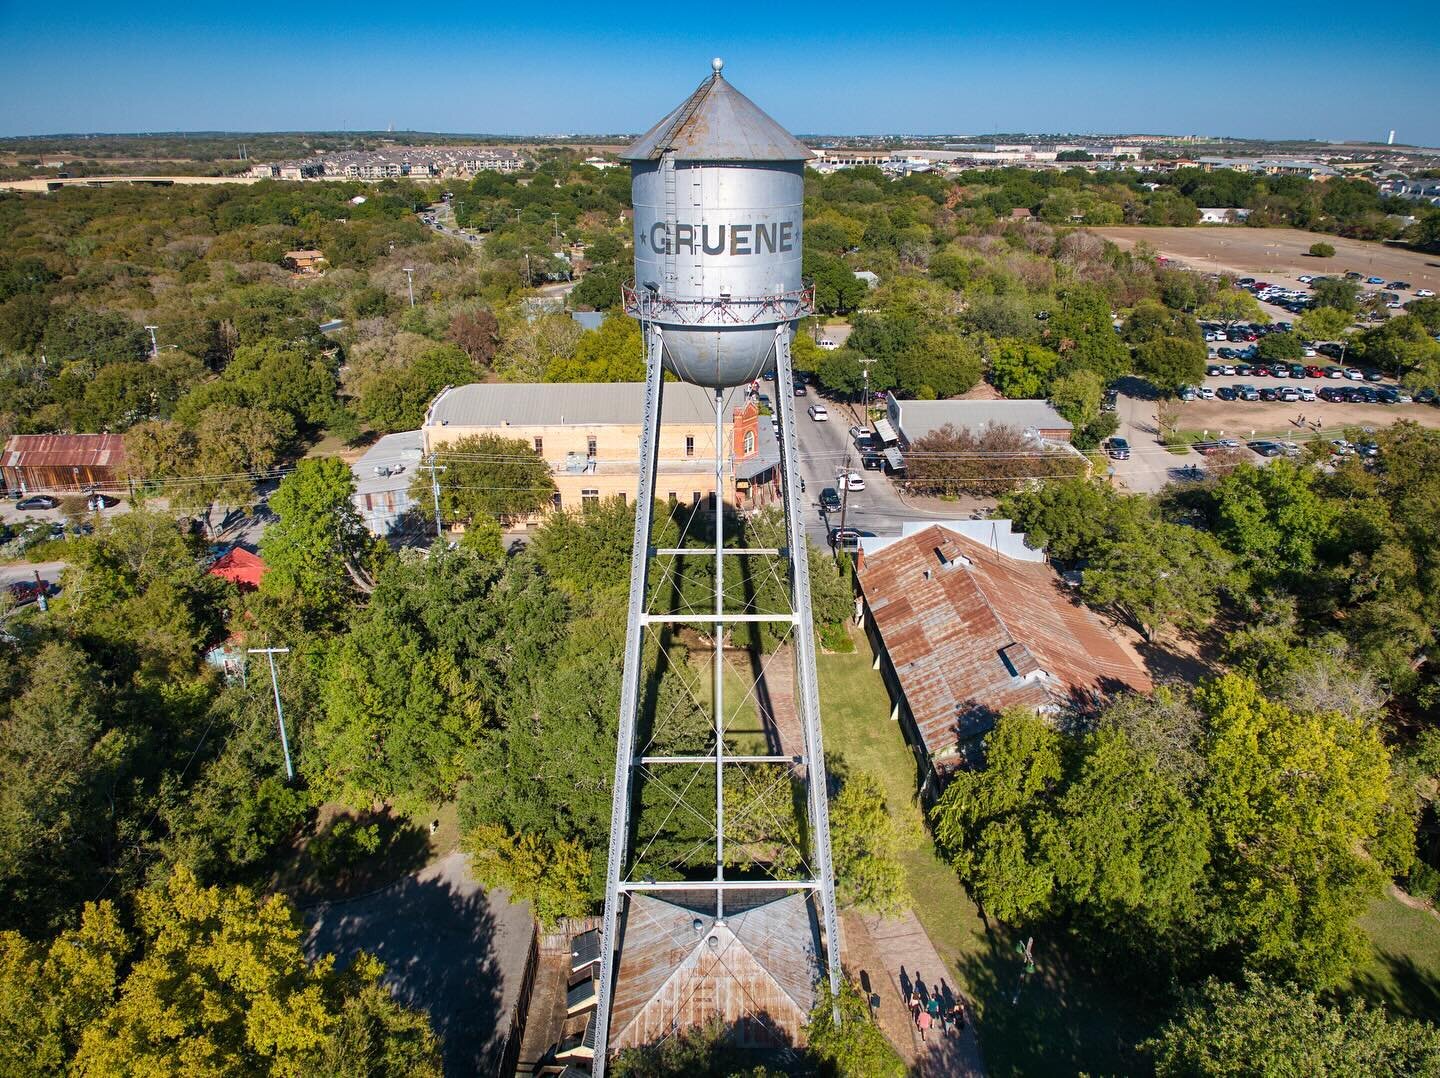 Originally settled over a century ago, Gruene is a snapshot of Texas culture and history come-to-life. With 15 walkable acres designated a National Historic District, visitors can shop, dine, and dance within the walls of the original township buildi